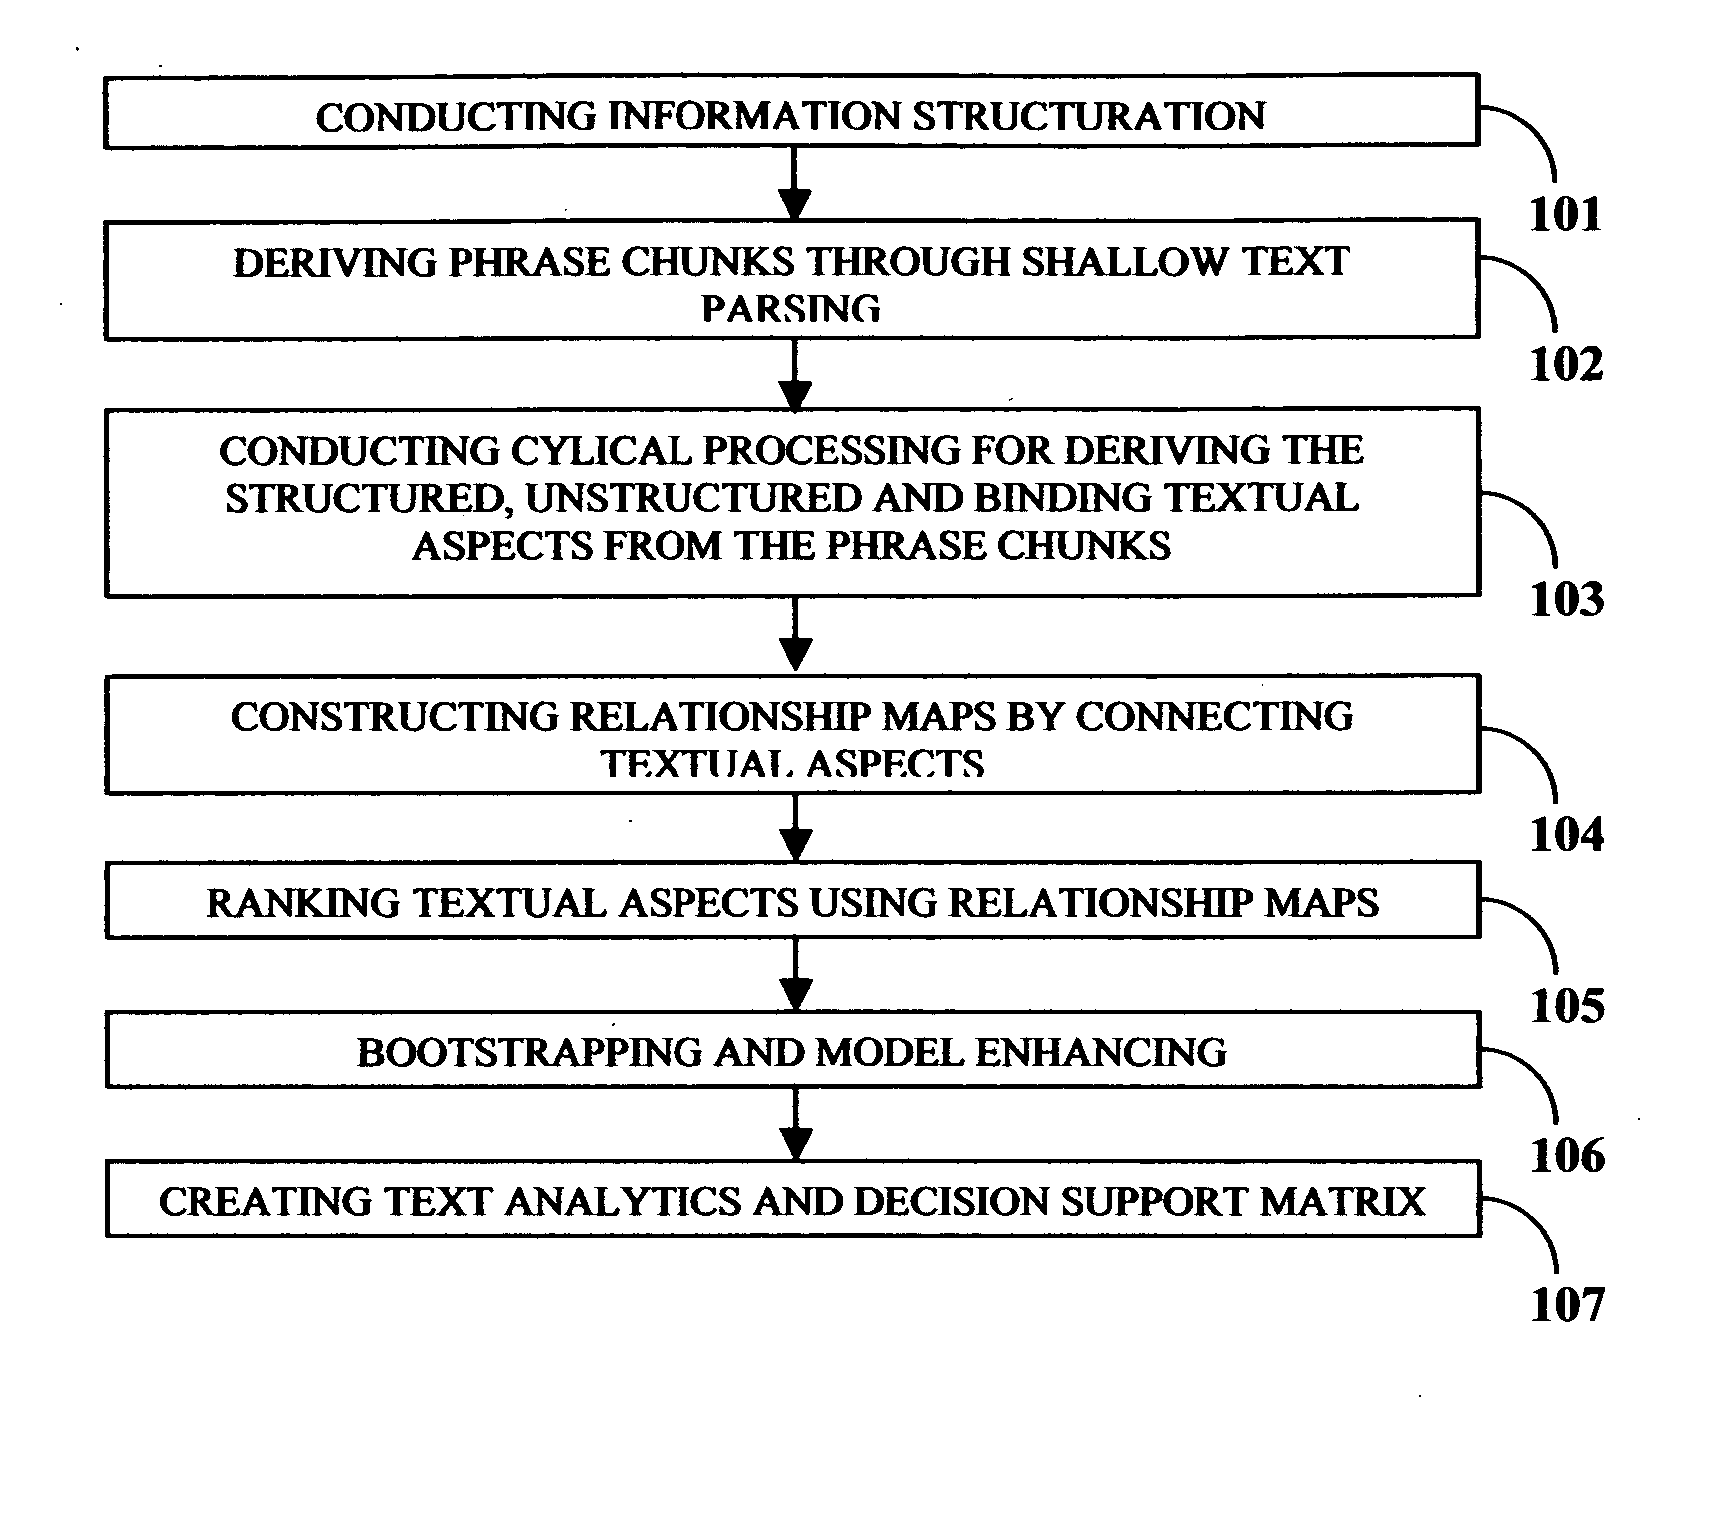 System and method of textual information analytics